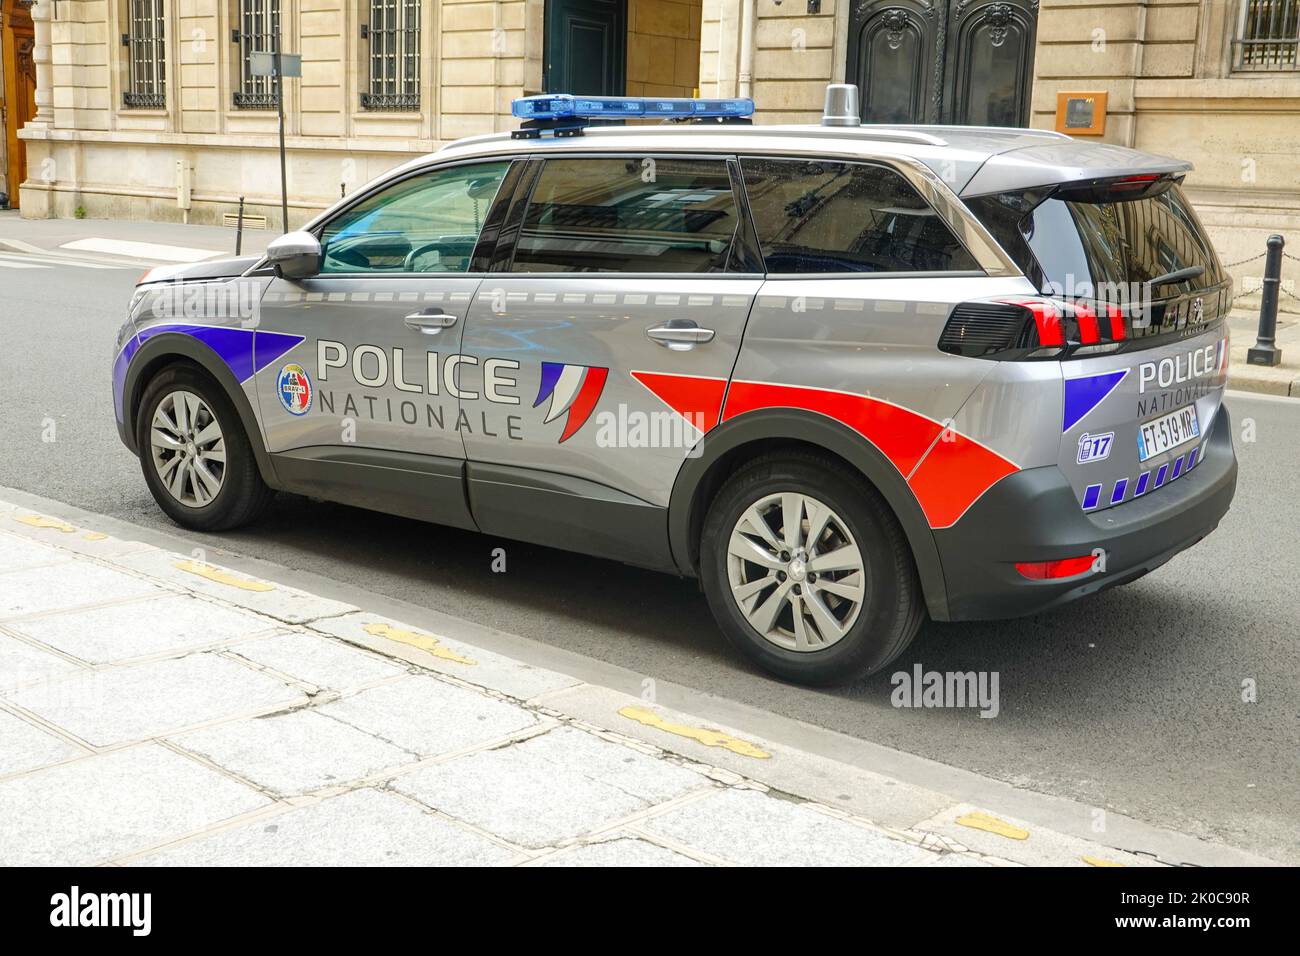 Police Nationale, National Police, car parked on Rue du Faubourg Saint-Honoré in the 8th Arrondissement of Paris, France. Stock Photo